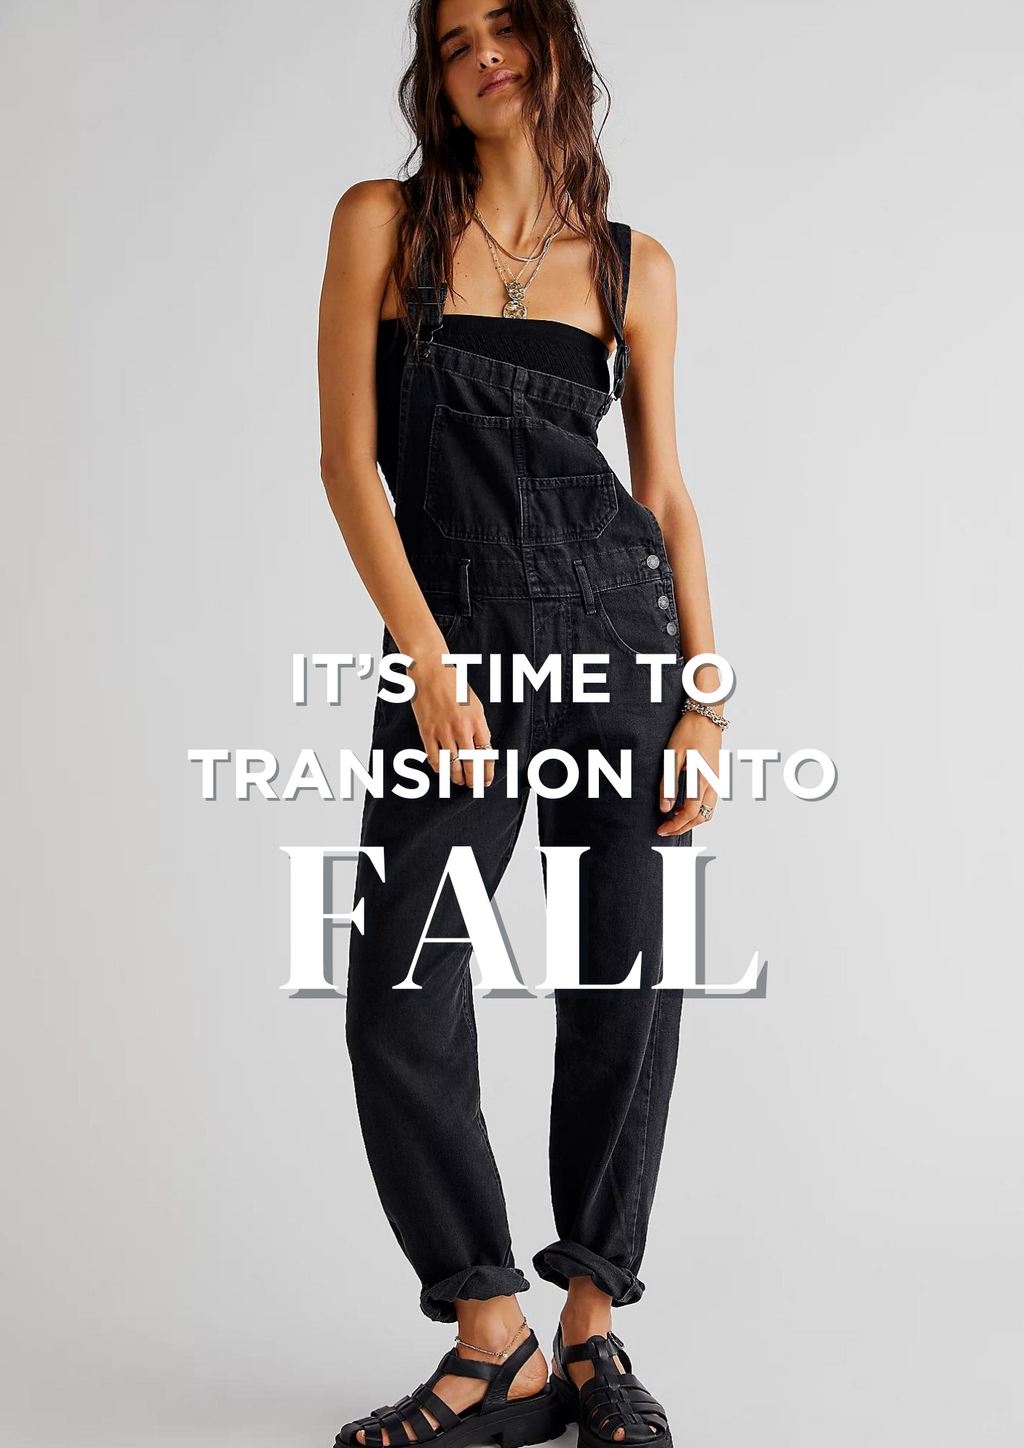 It's Time To Transition Into Fall.